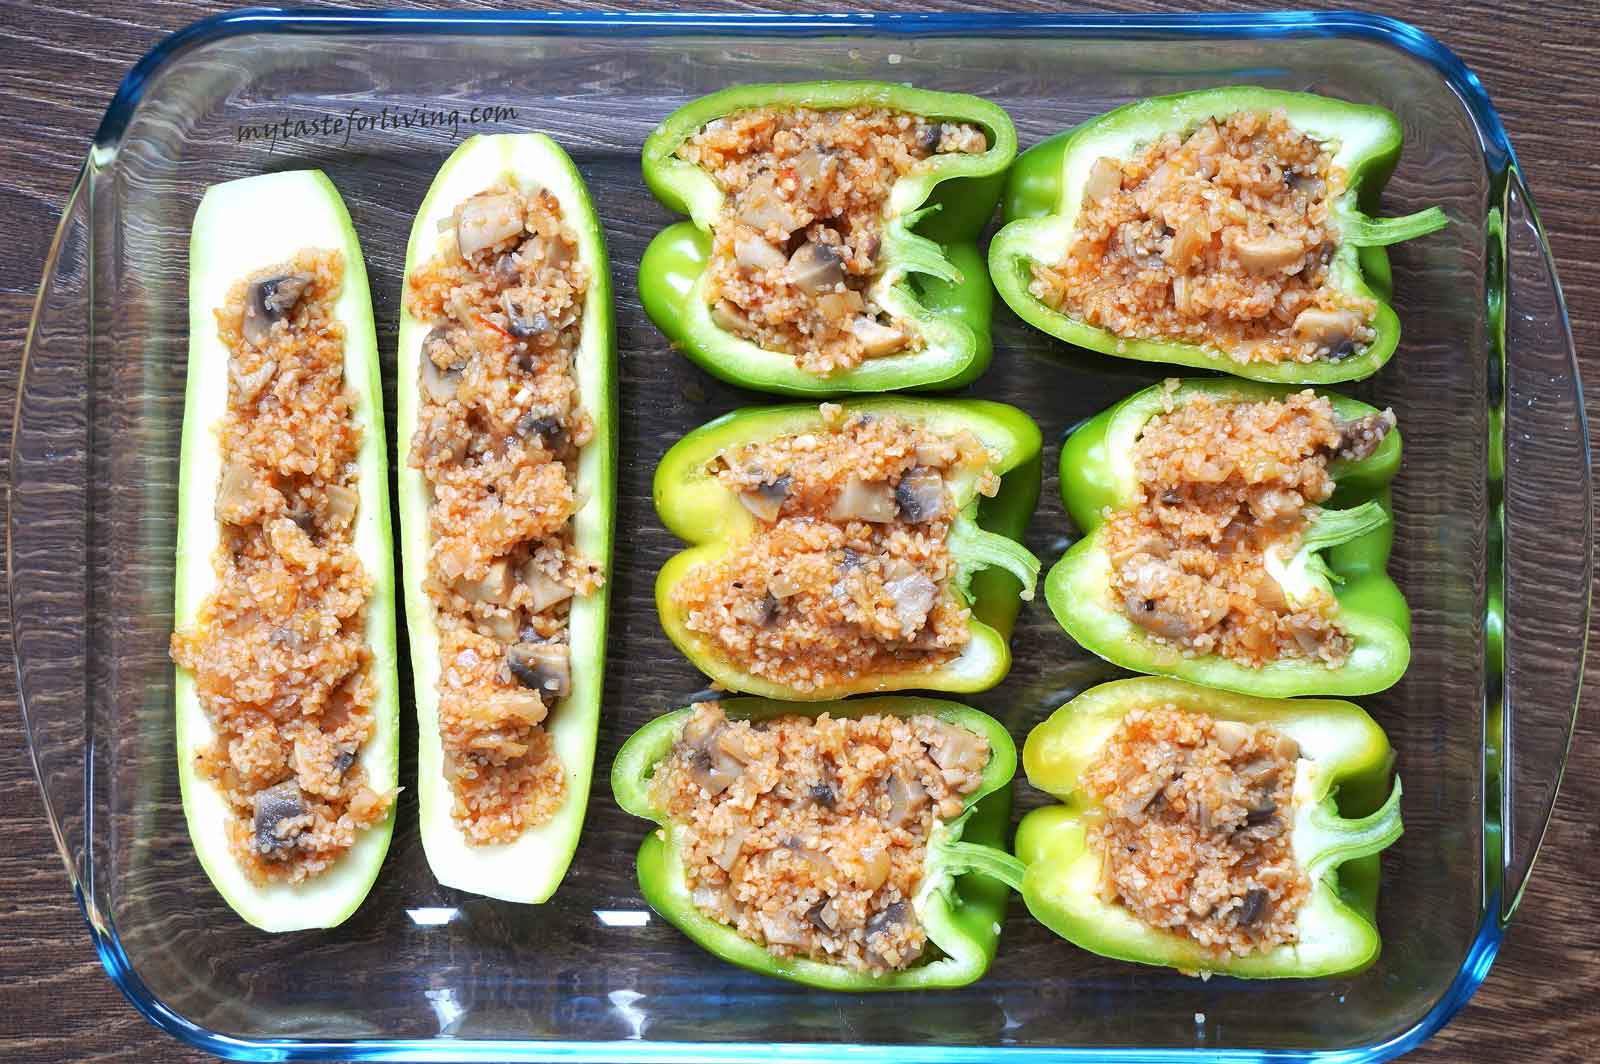 Delicious stuffed zucchini and peppers baked in the oven with bulgur, mushrooms, onions and tomatoes.